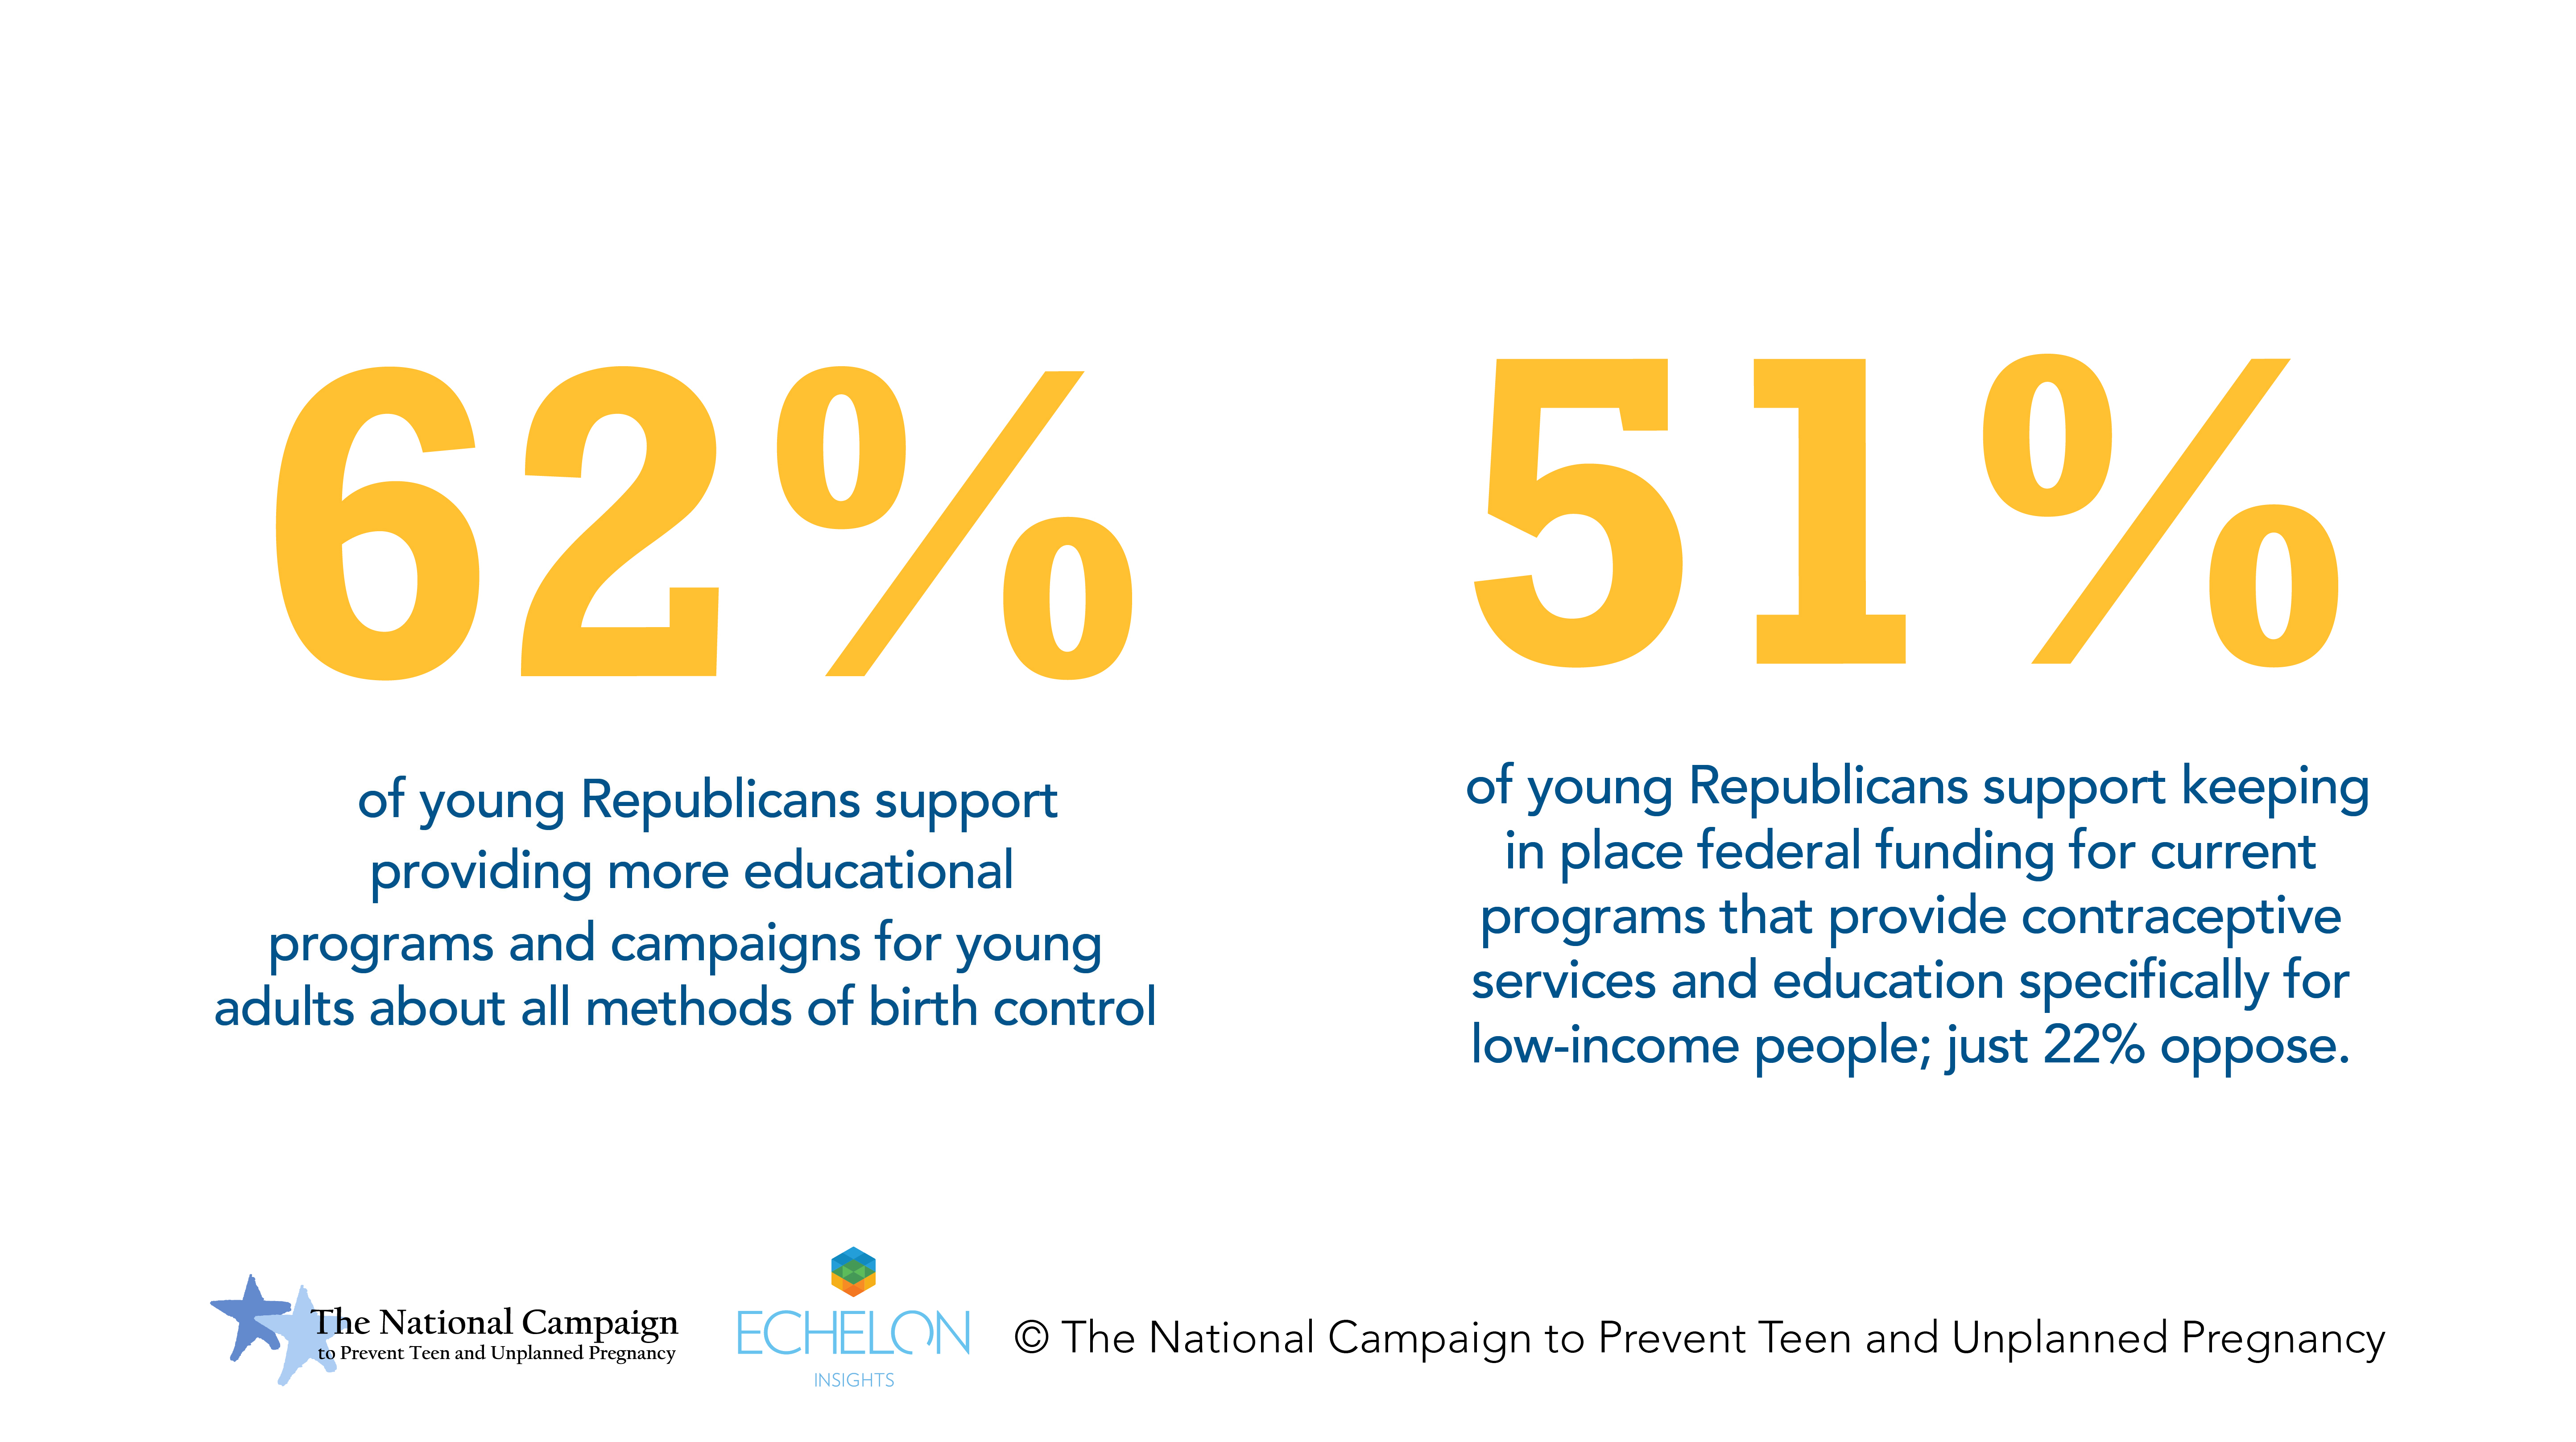 Survey Says: Young Republicans and Birth Control (March 2015)